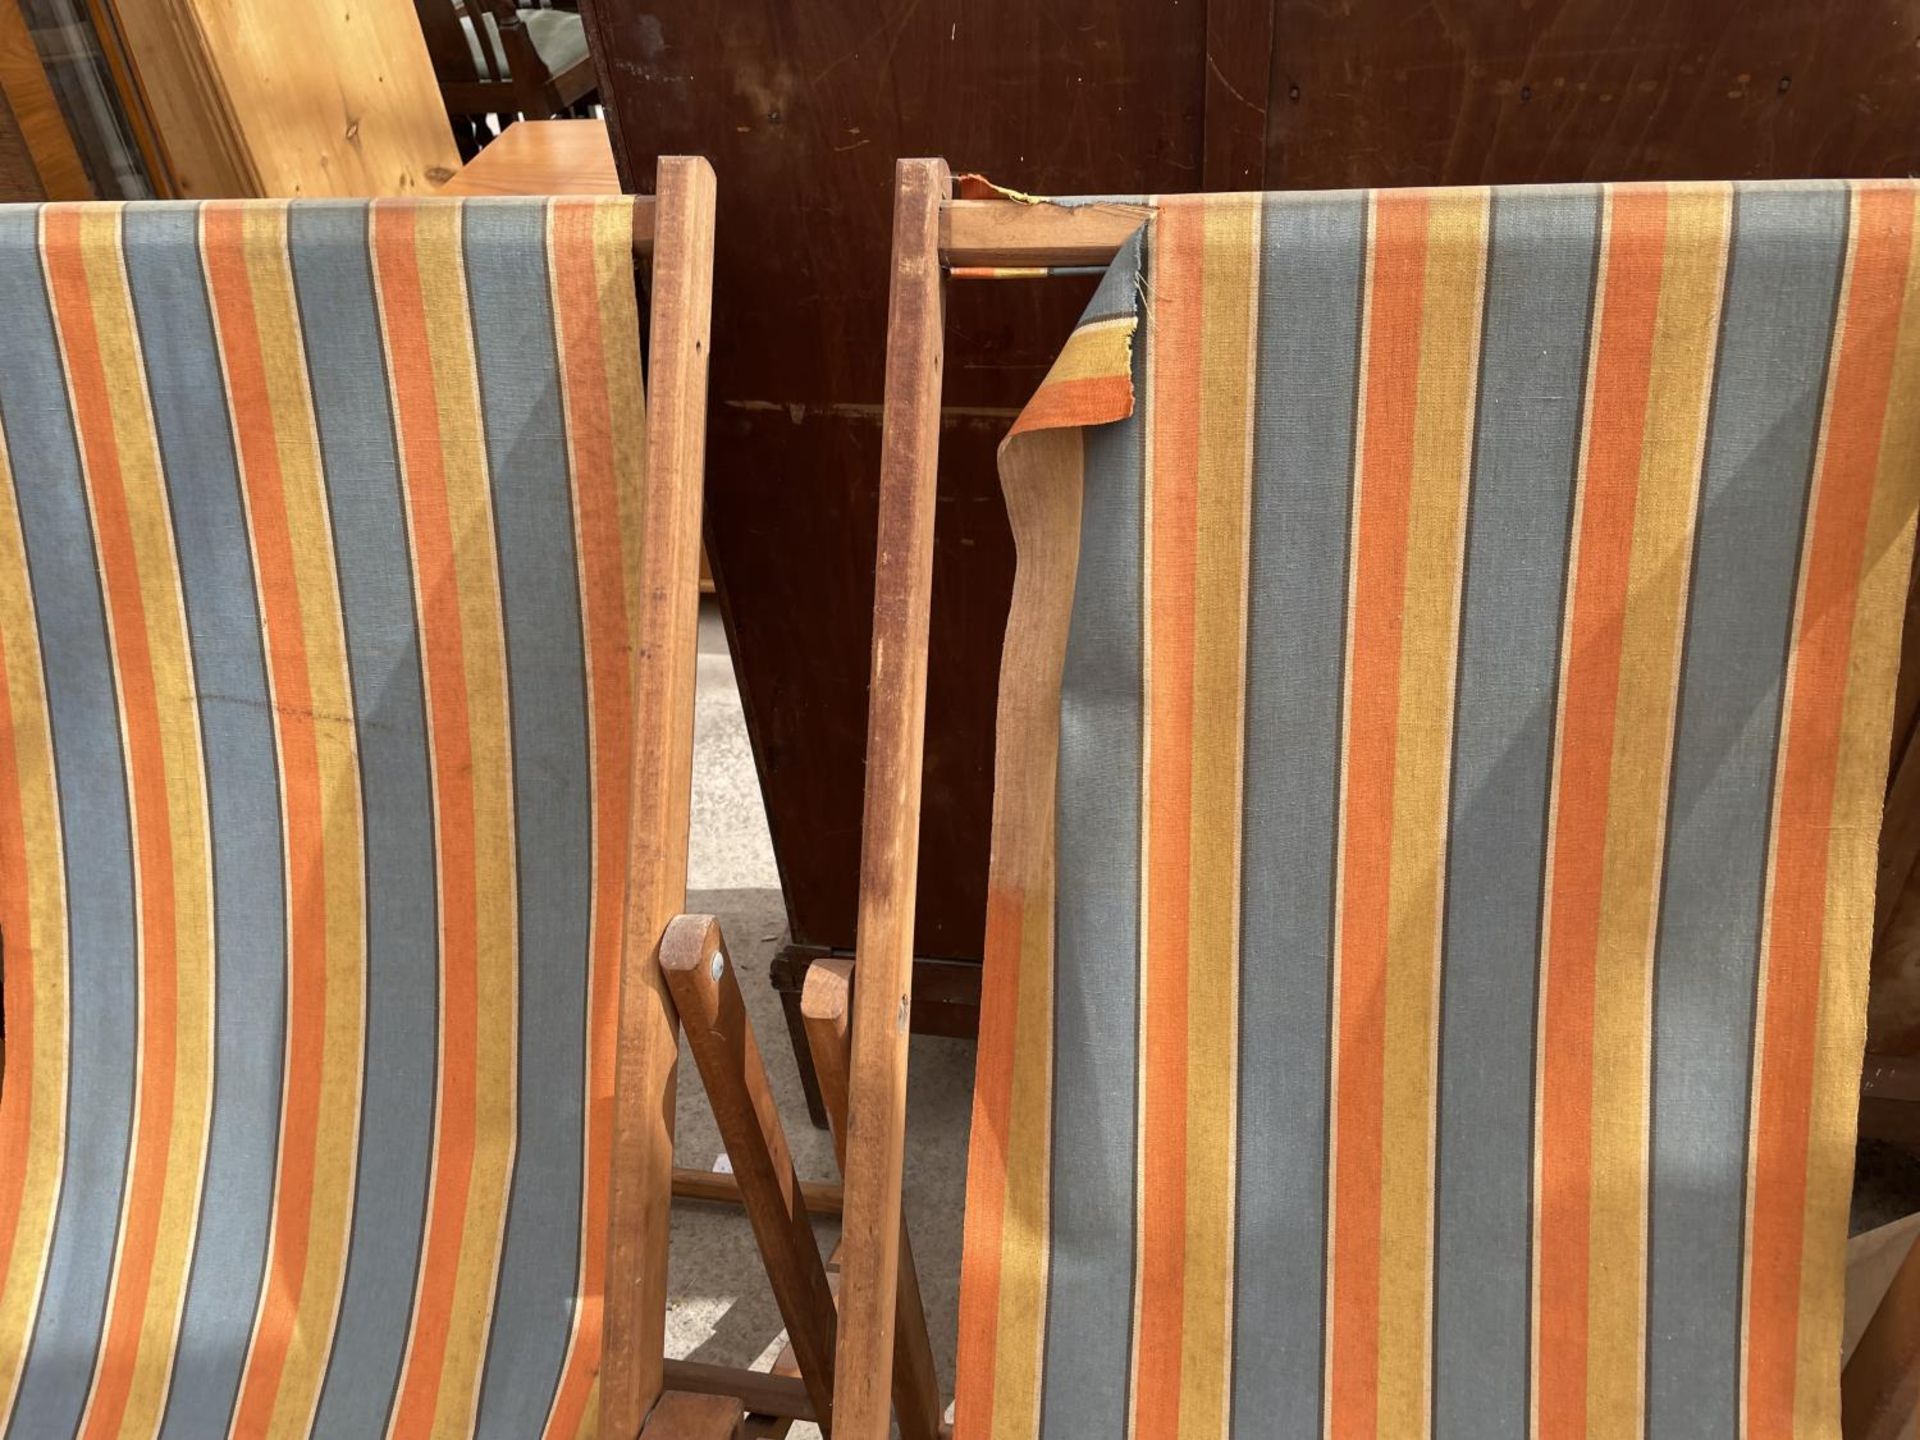 A PAIR OF WOODEN FRAMED FOLDING DECK CHAIRS - Image 2 of 4